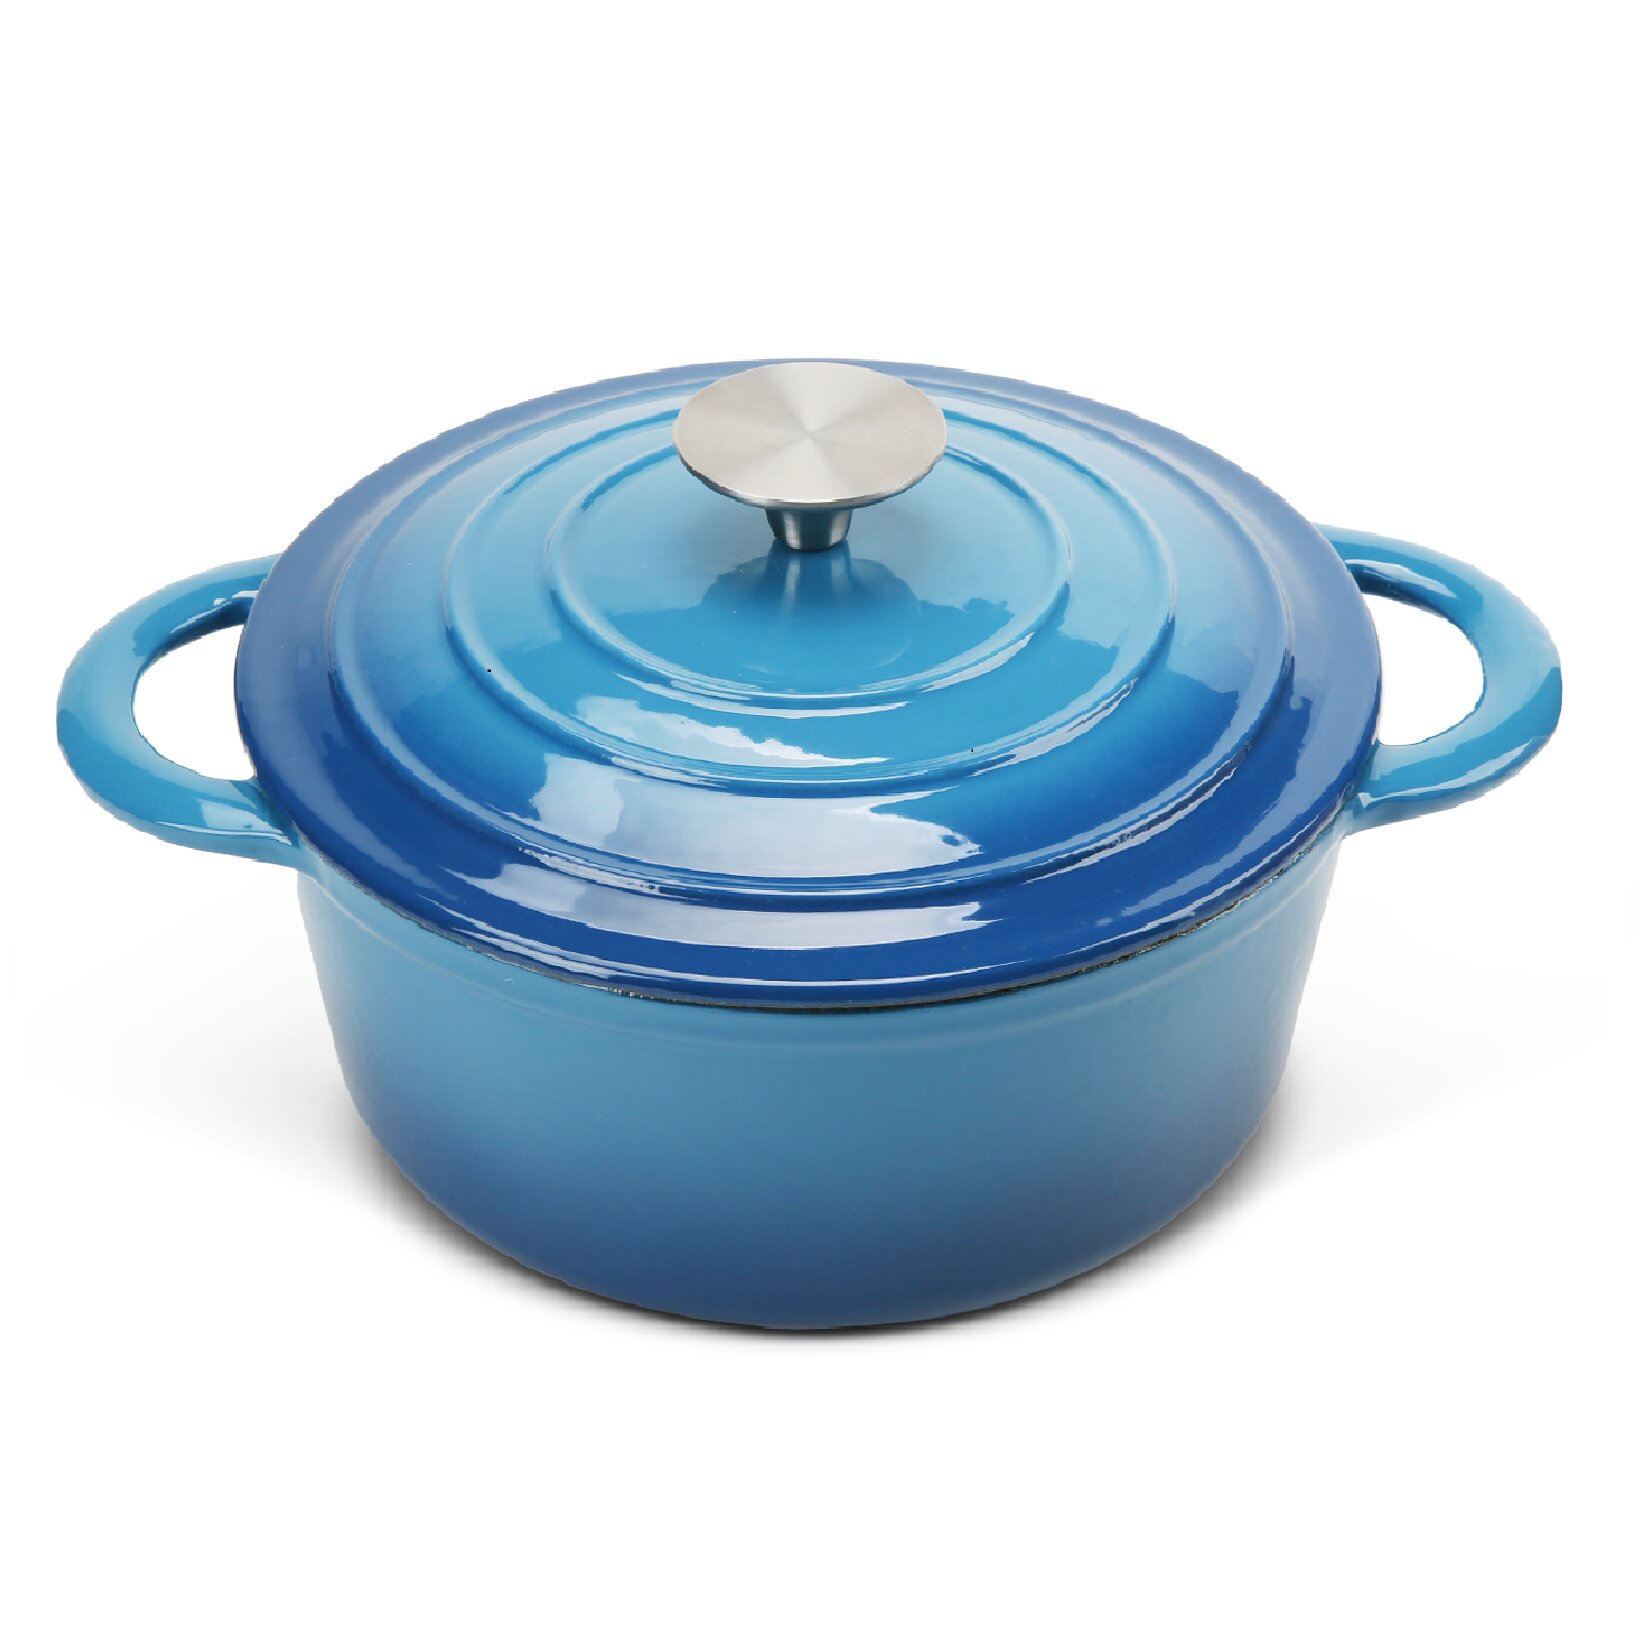 Classic Cuisine Cast Iron Dutch Oven with Lid-3 Quart Enamel Coated Pot for  Oven or Stovetop-For Soup Stew Chili